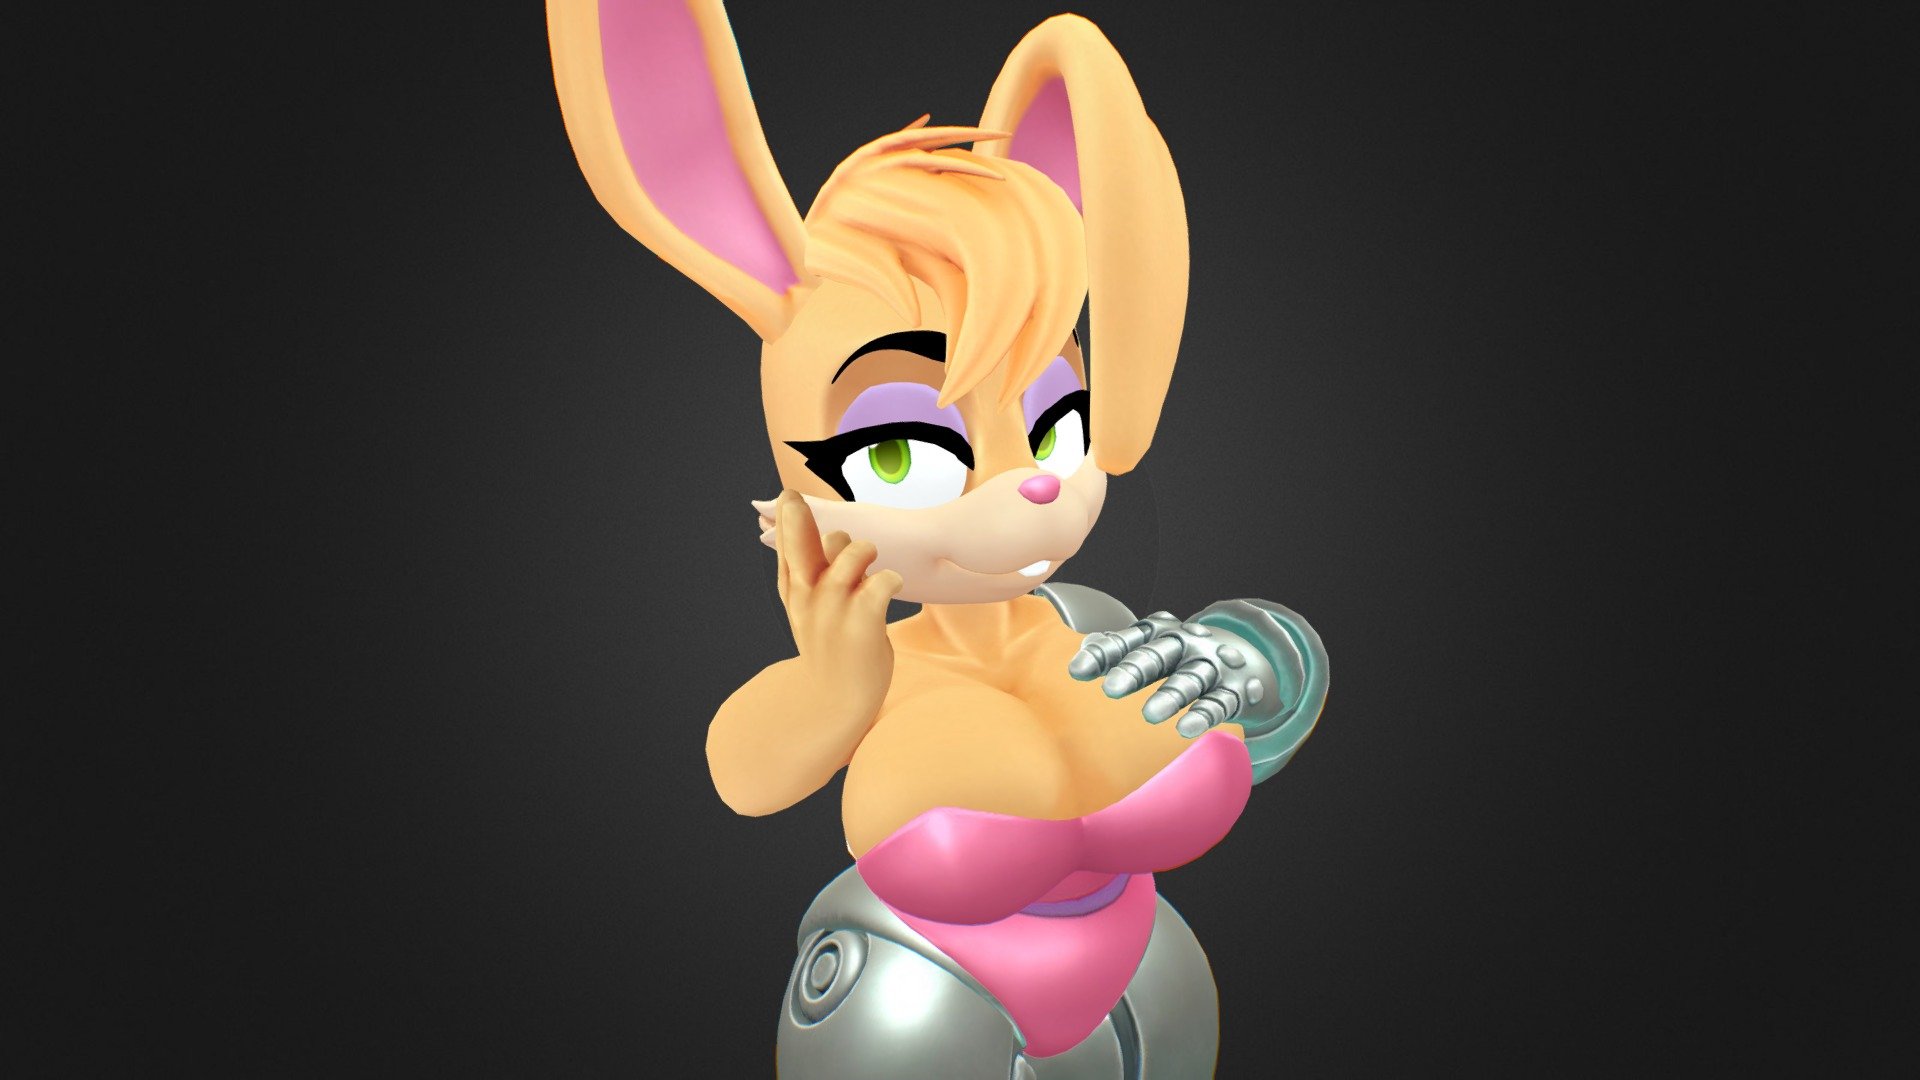 Bunnie is done!
See her in motion and the full promo video on Twitter:
https://twitter.com/ChunkerBuns/status/1272698169416208384

Available for purchase on Gumroad. Link above

A million thanks to my patrons for making it possible 3d model